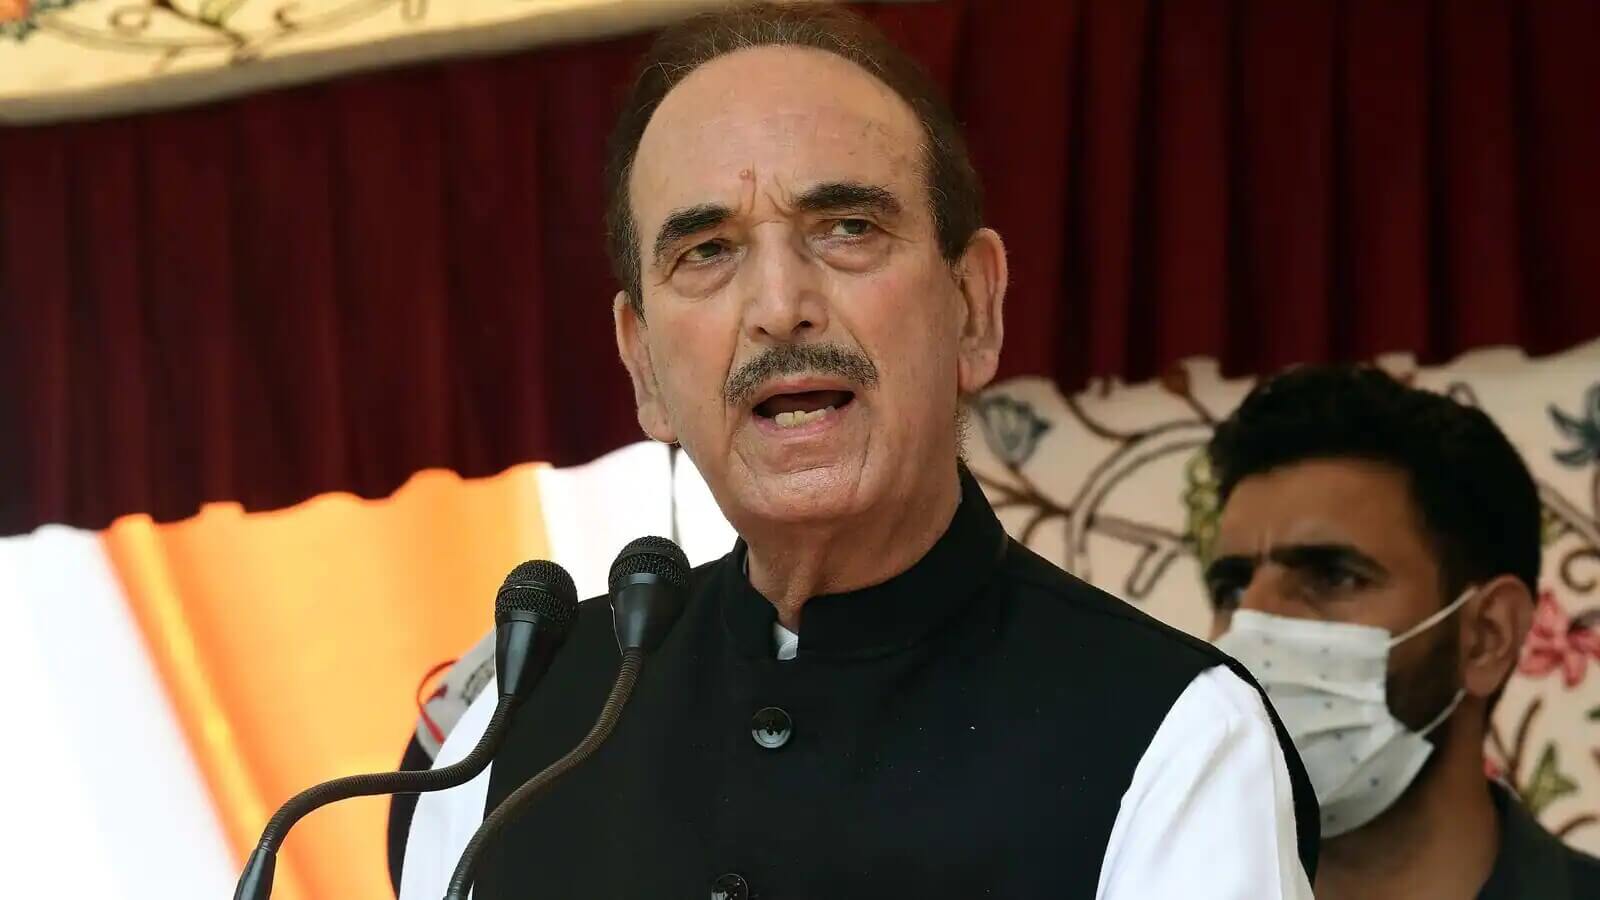 Congress leader Ghulam Nabi Azad likely to launch his party next week